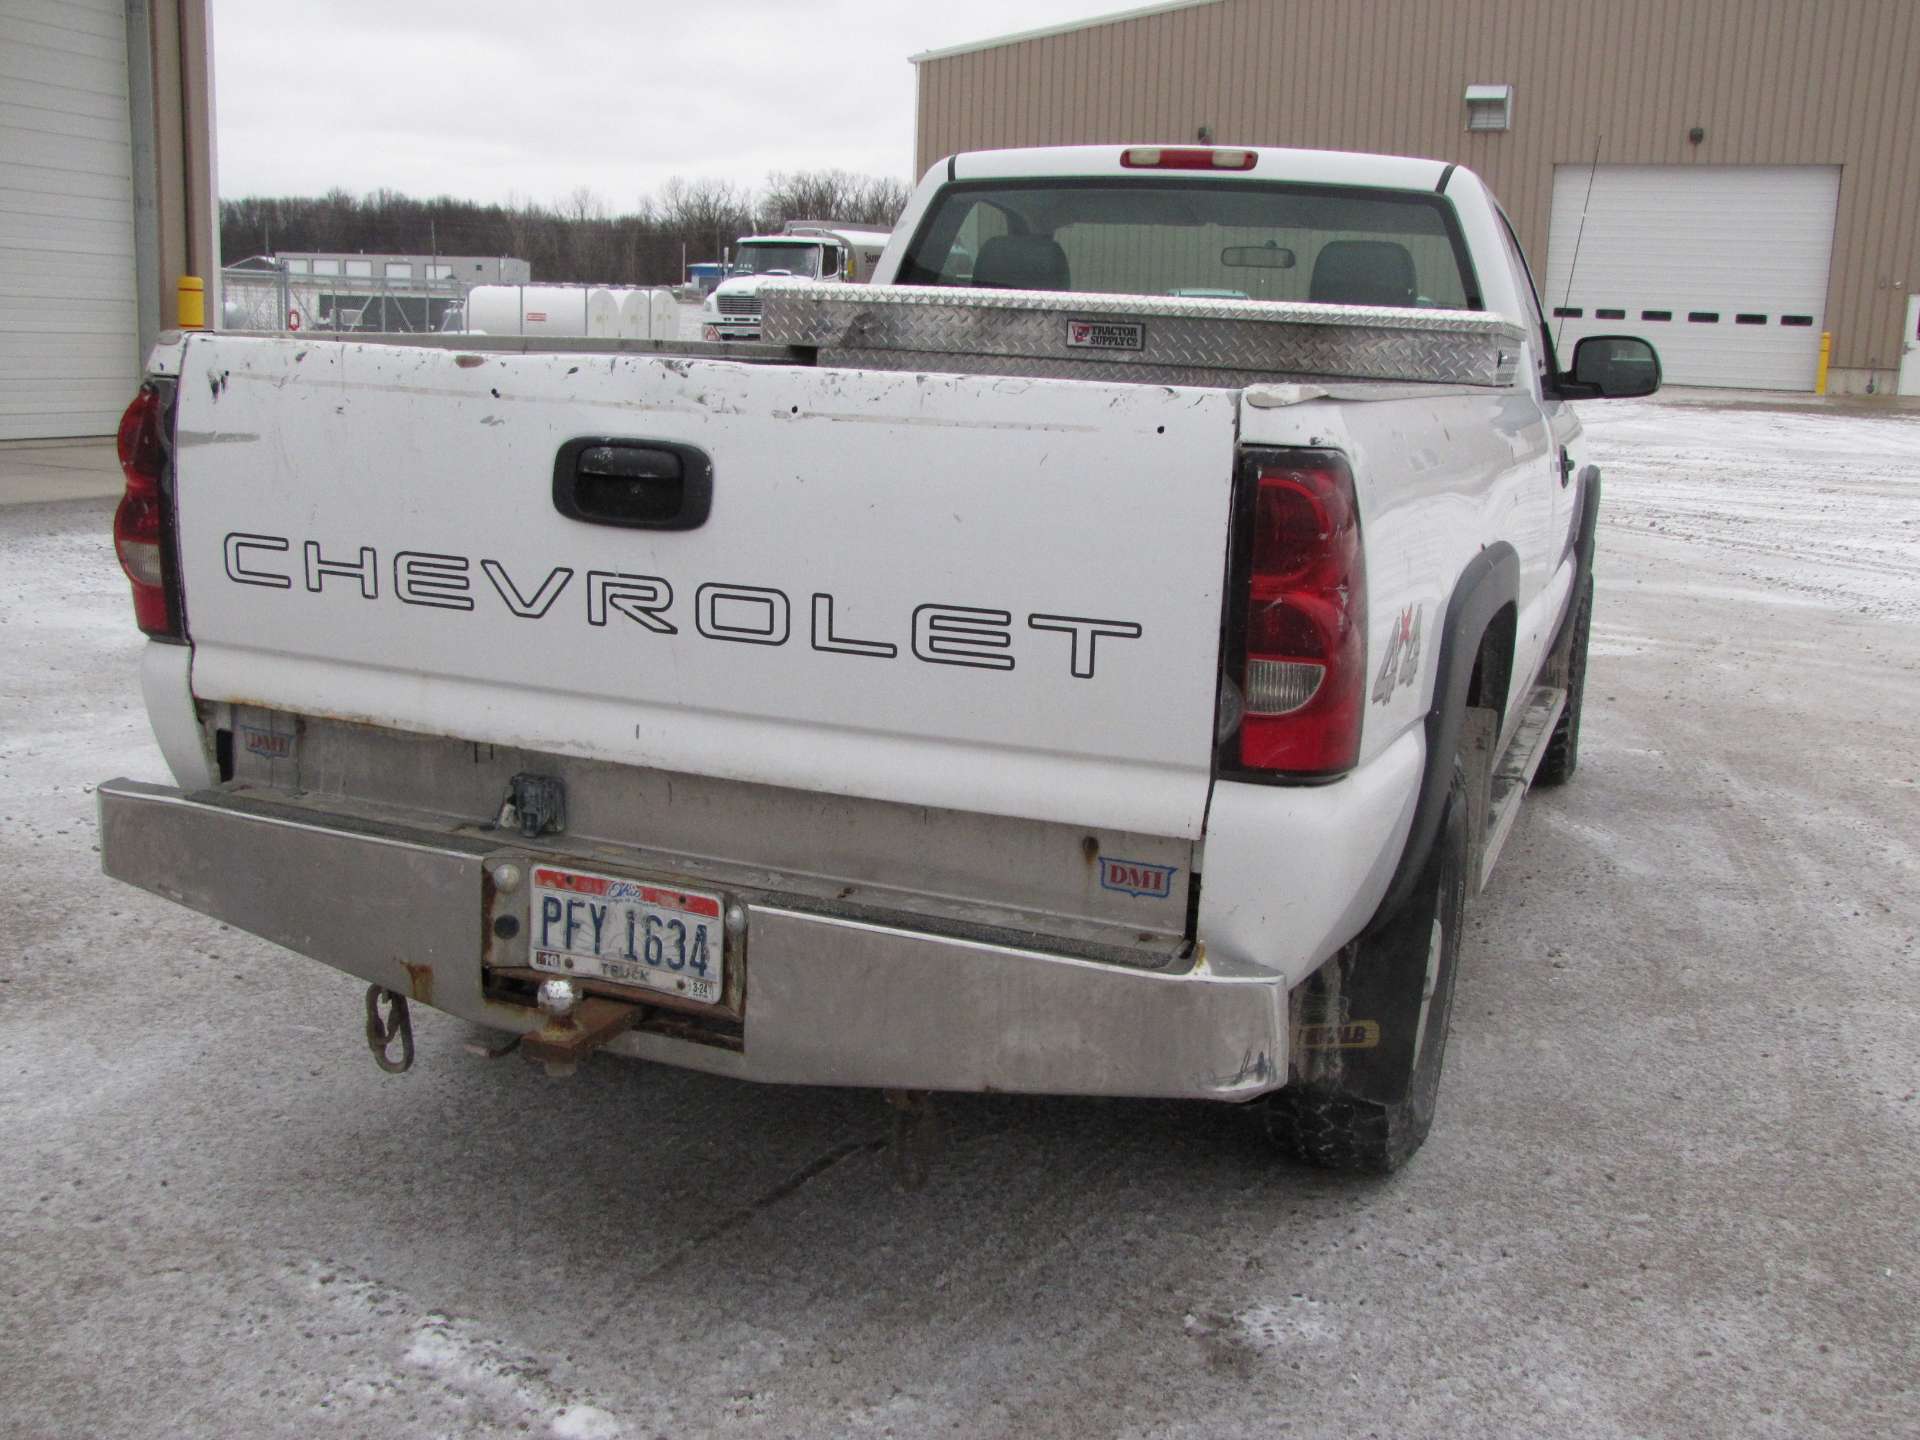 2006 Chevy 2500 HD pickup truck - Image 7 of 63